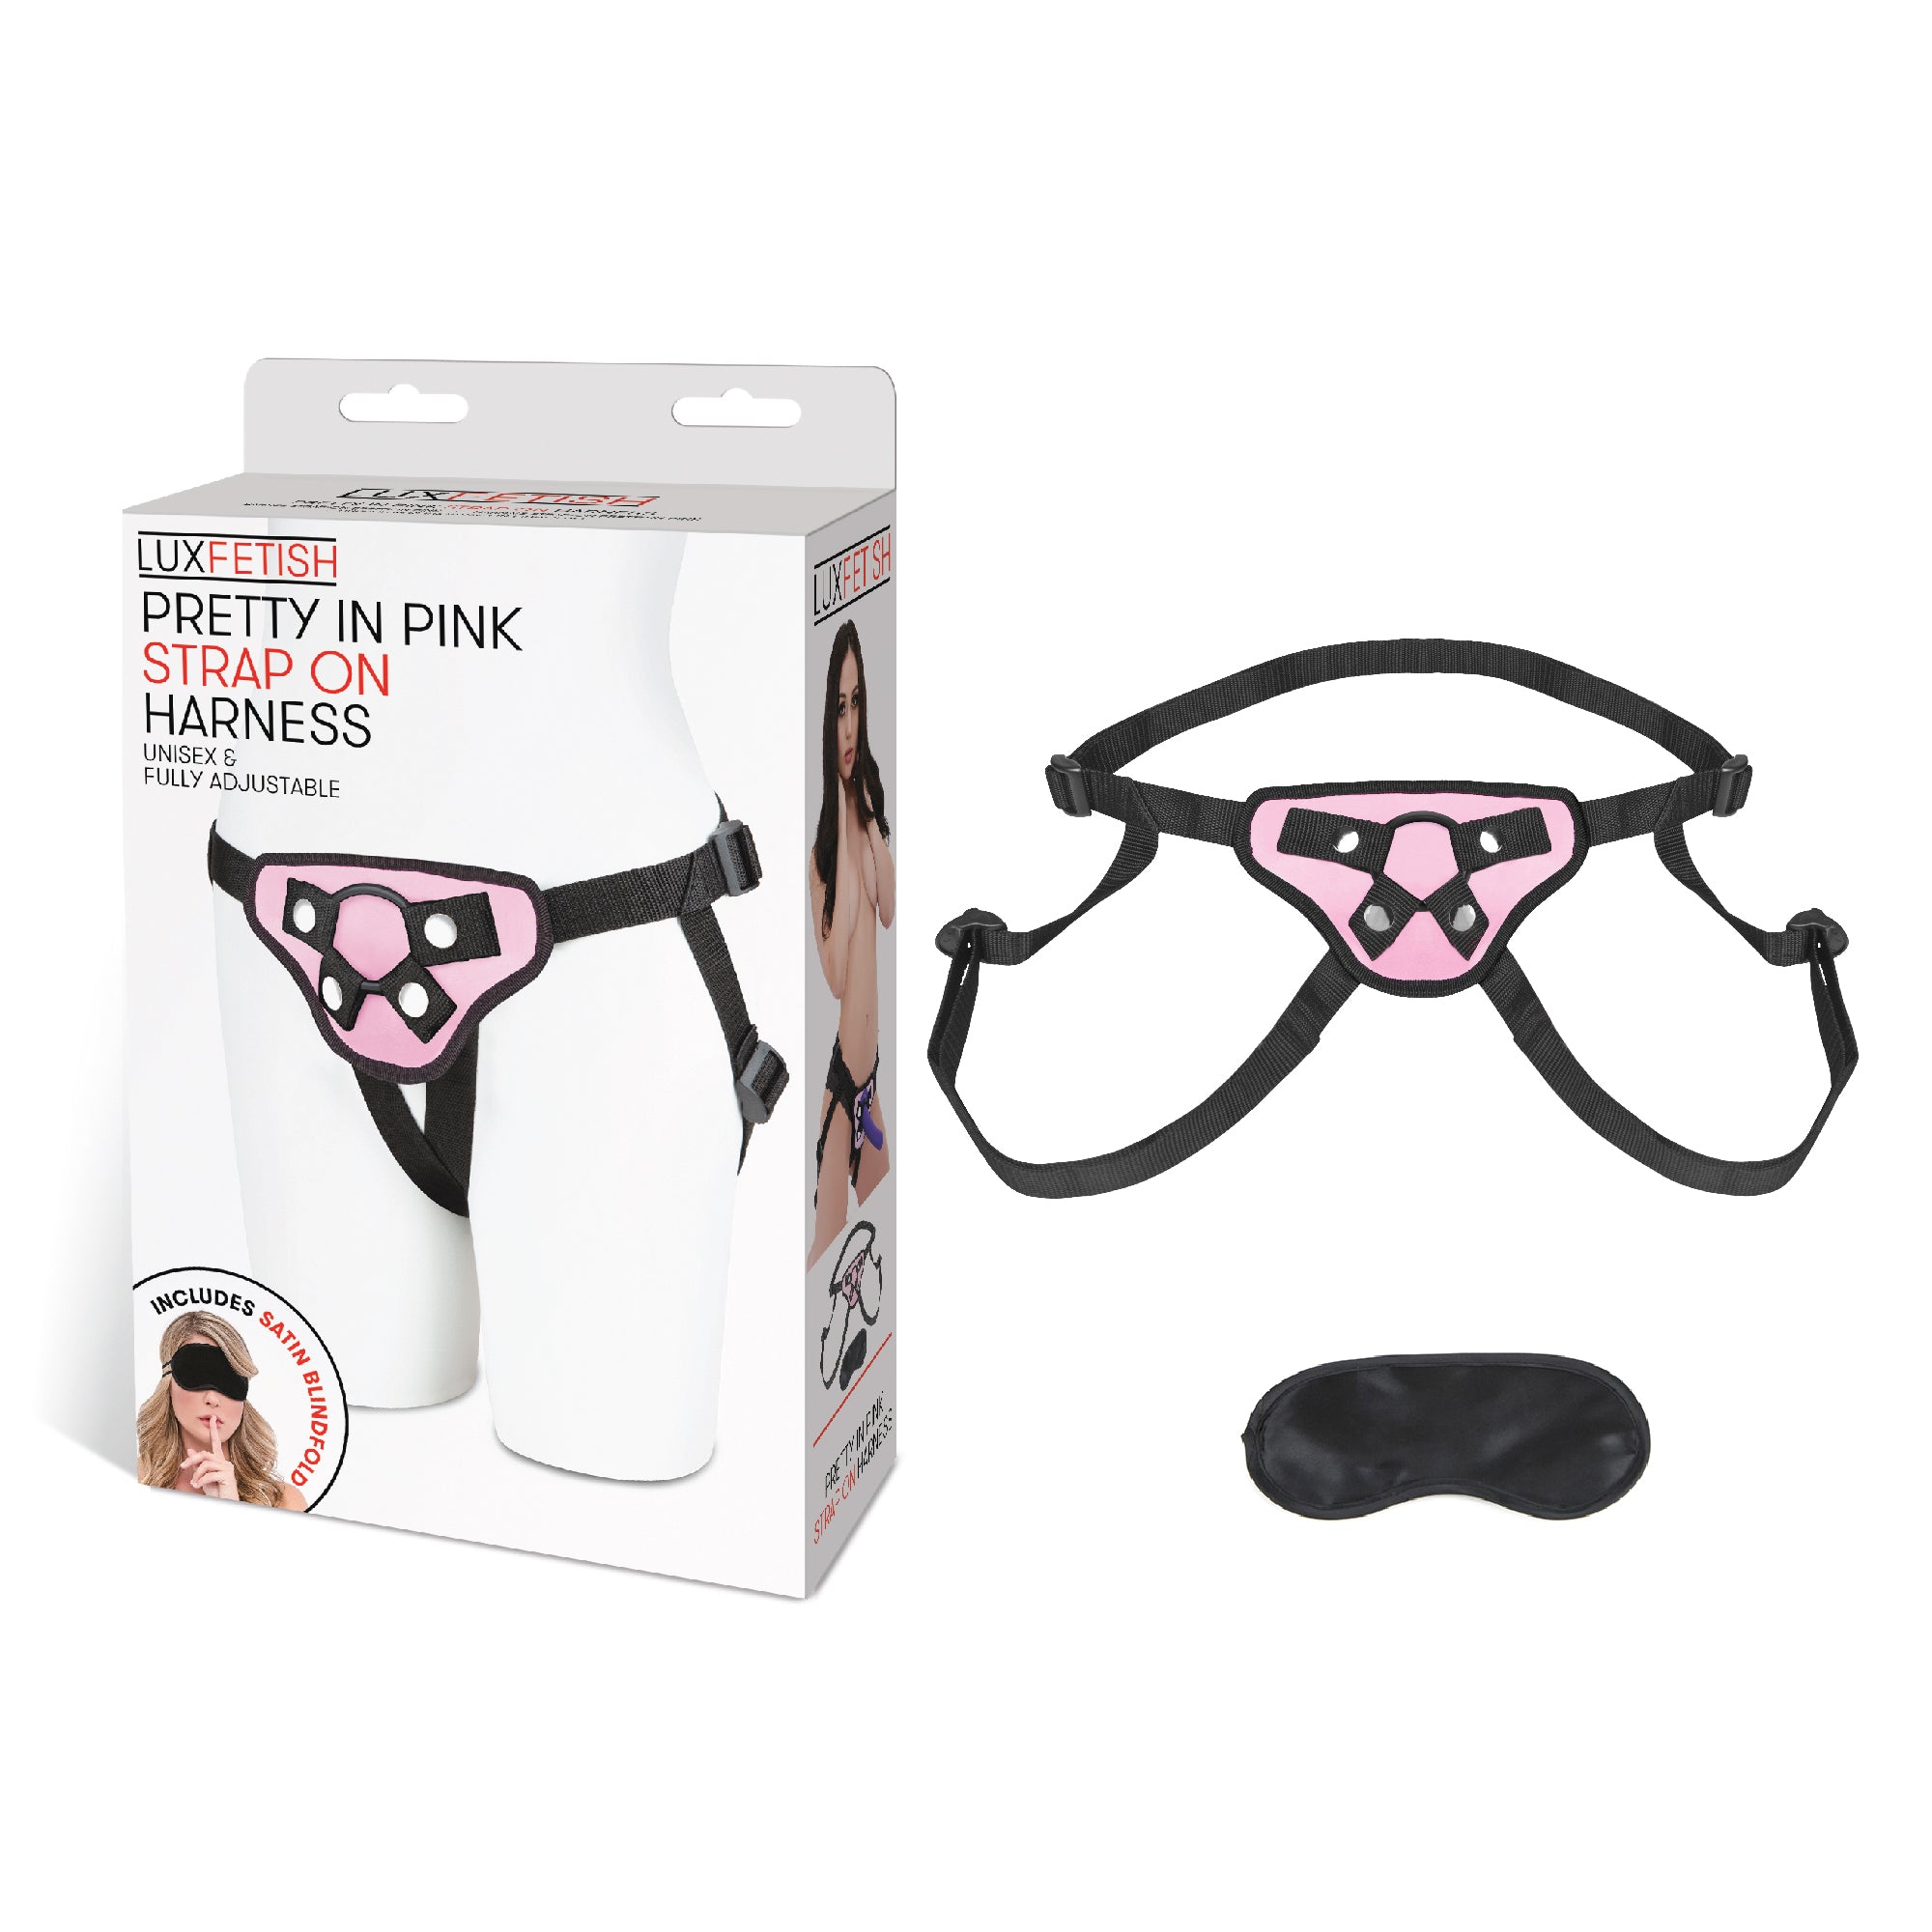 Lux Fetish Pretty in Pink Strap-on Harness